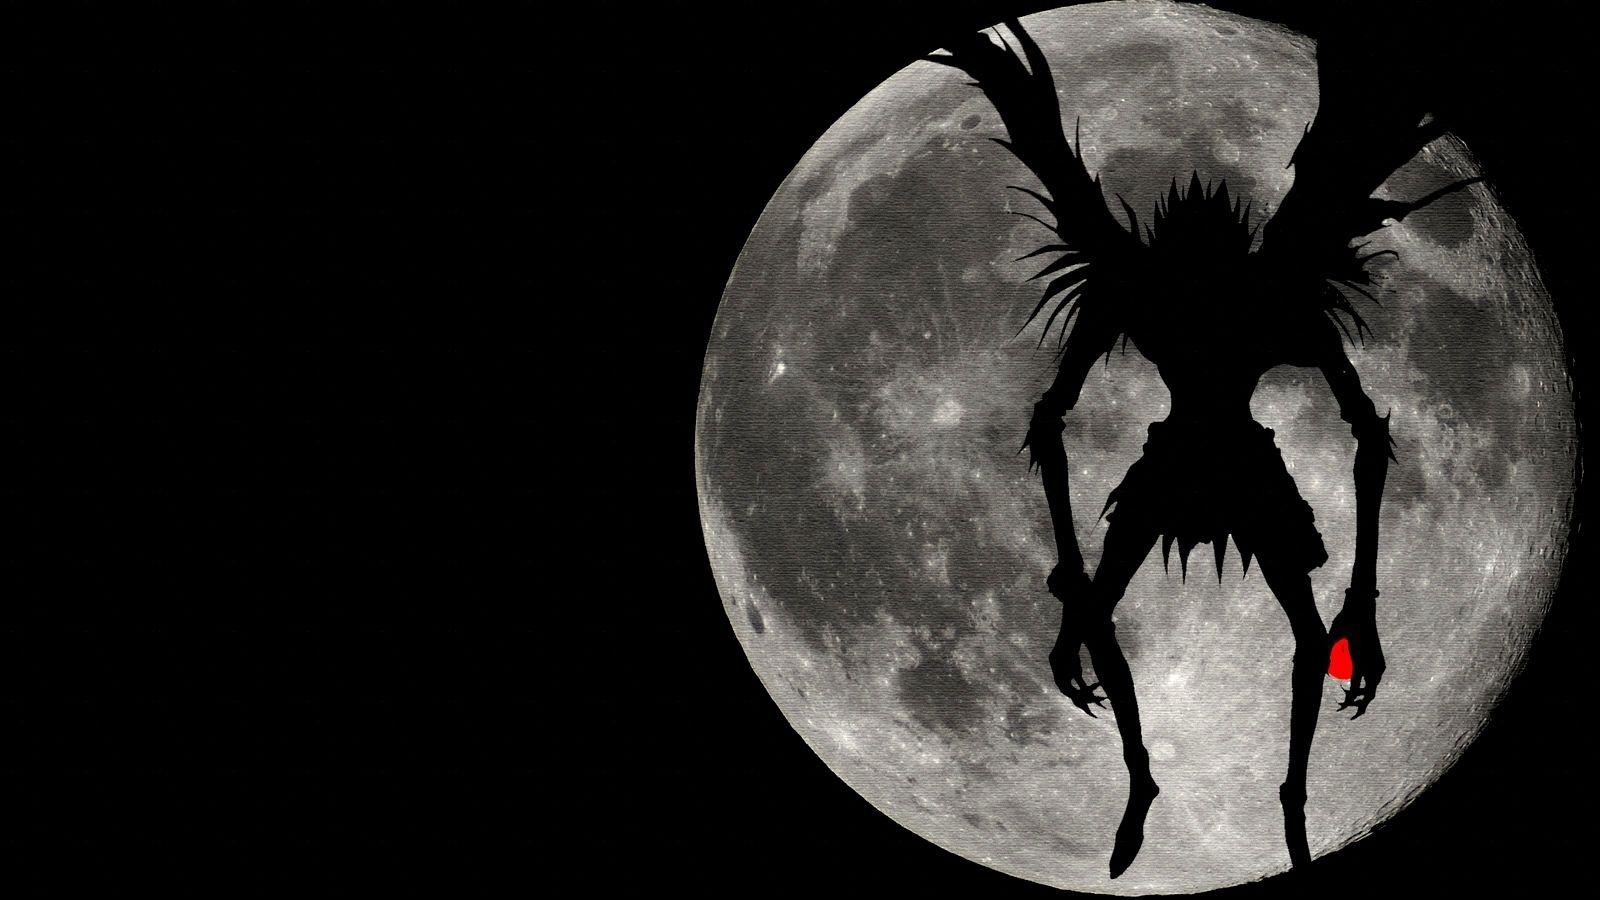 Ryuk Death Note Cool Wallpapers